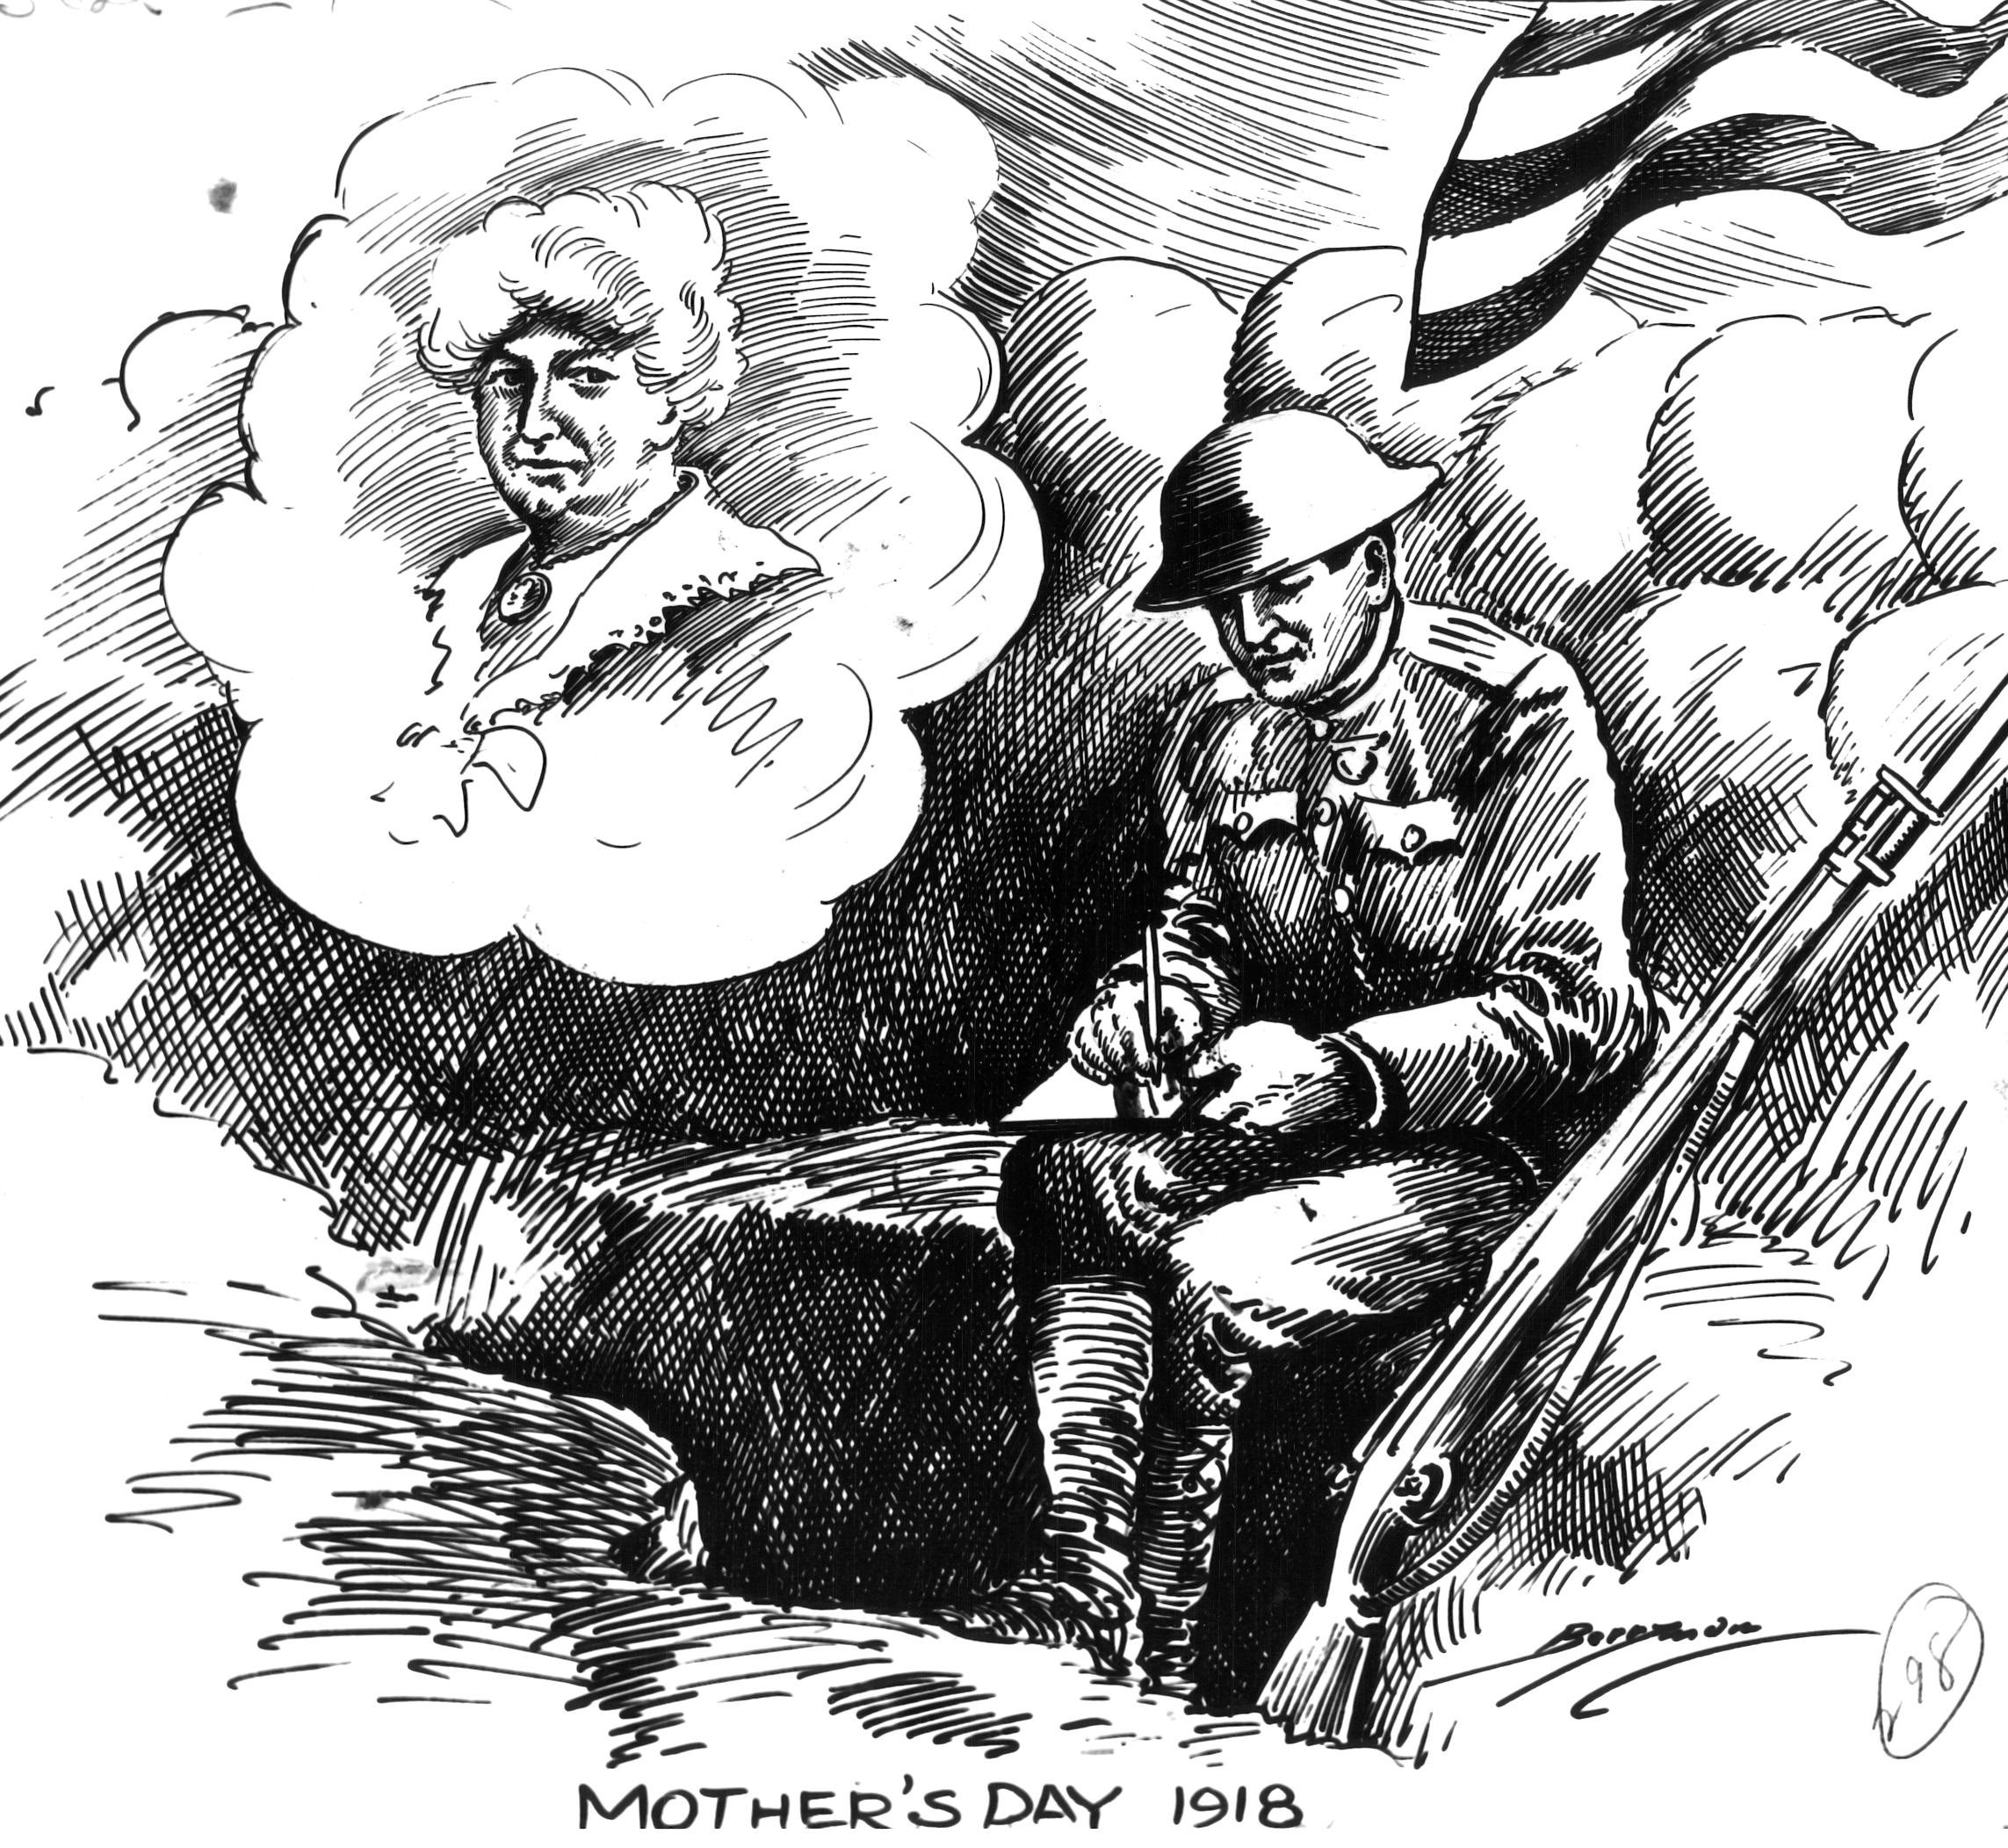 Clifford Berryman illustration, Mother’s Day, May 12, 1918